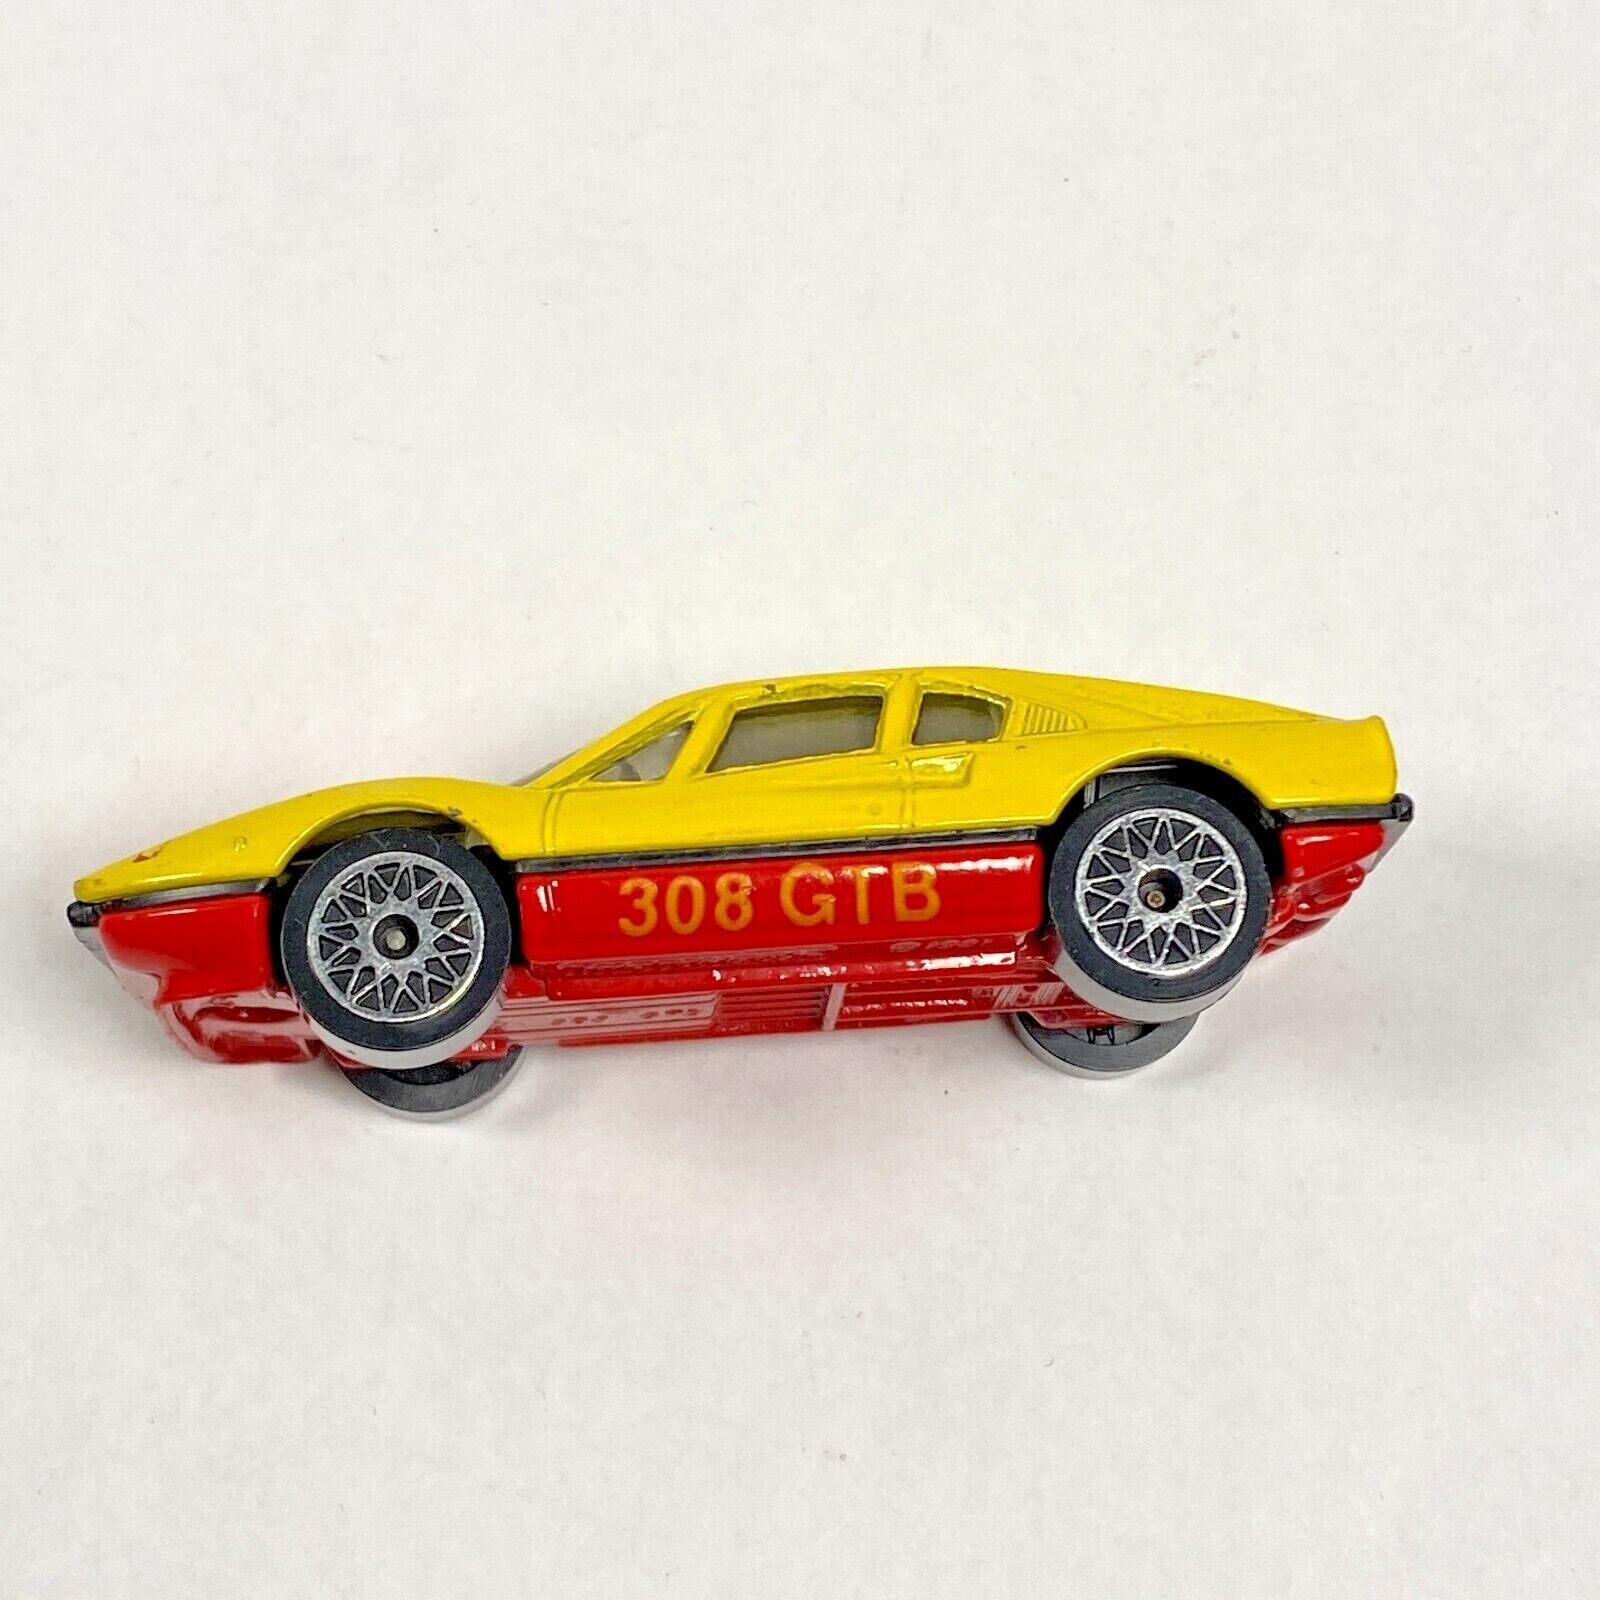 Primary image for Matchbox Ferrari 308 GTS Yellow and Red 1981 Vintage Diecast Toy Car